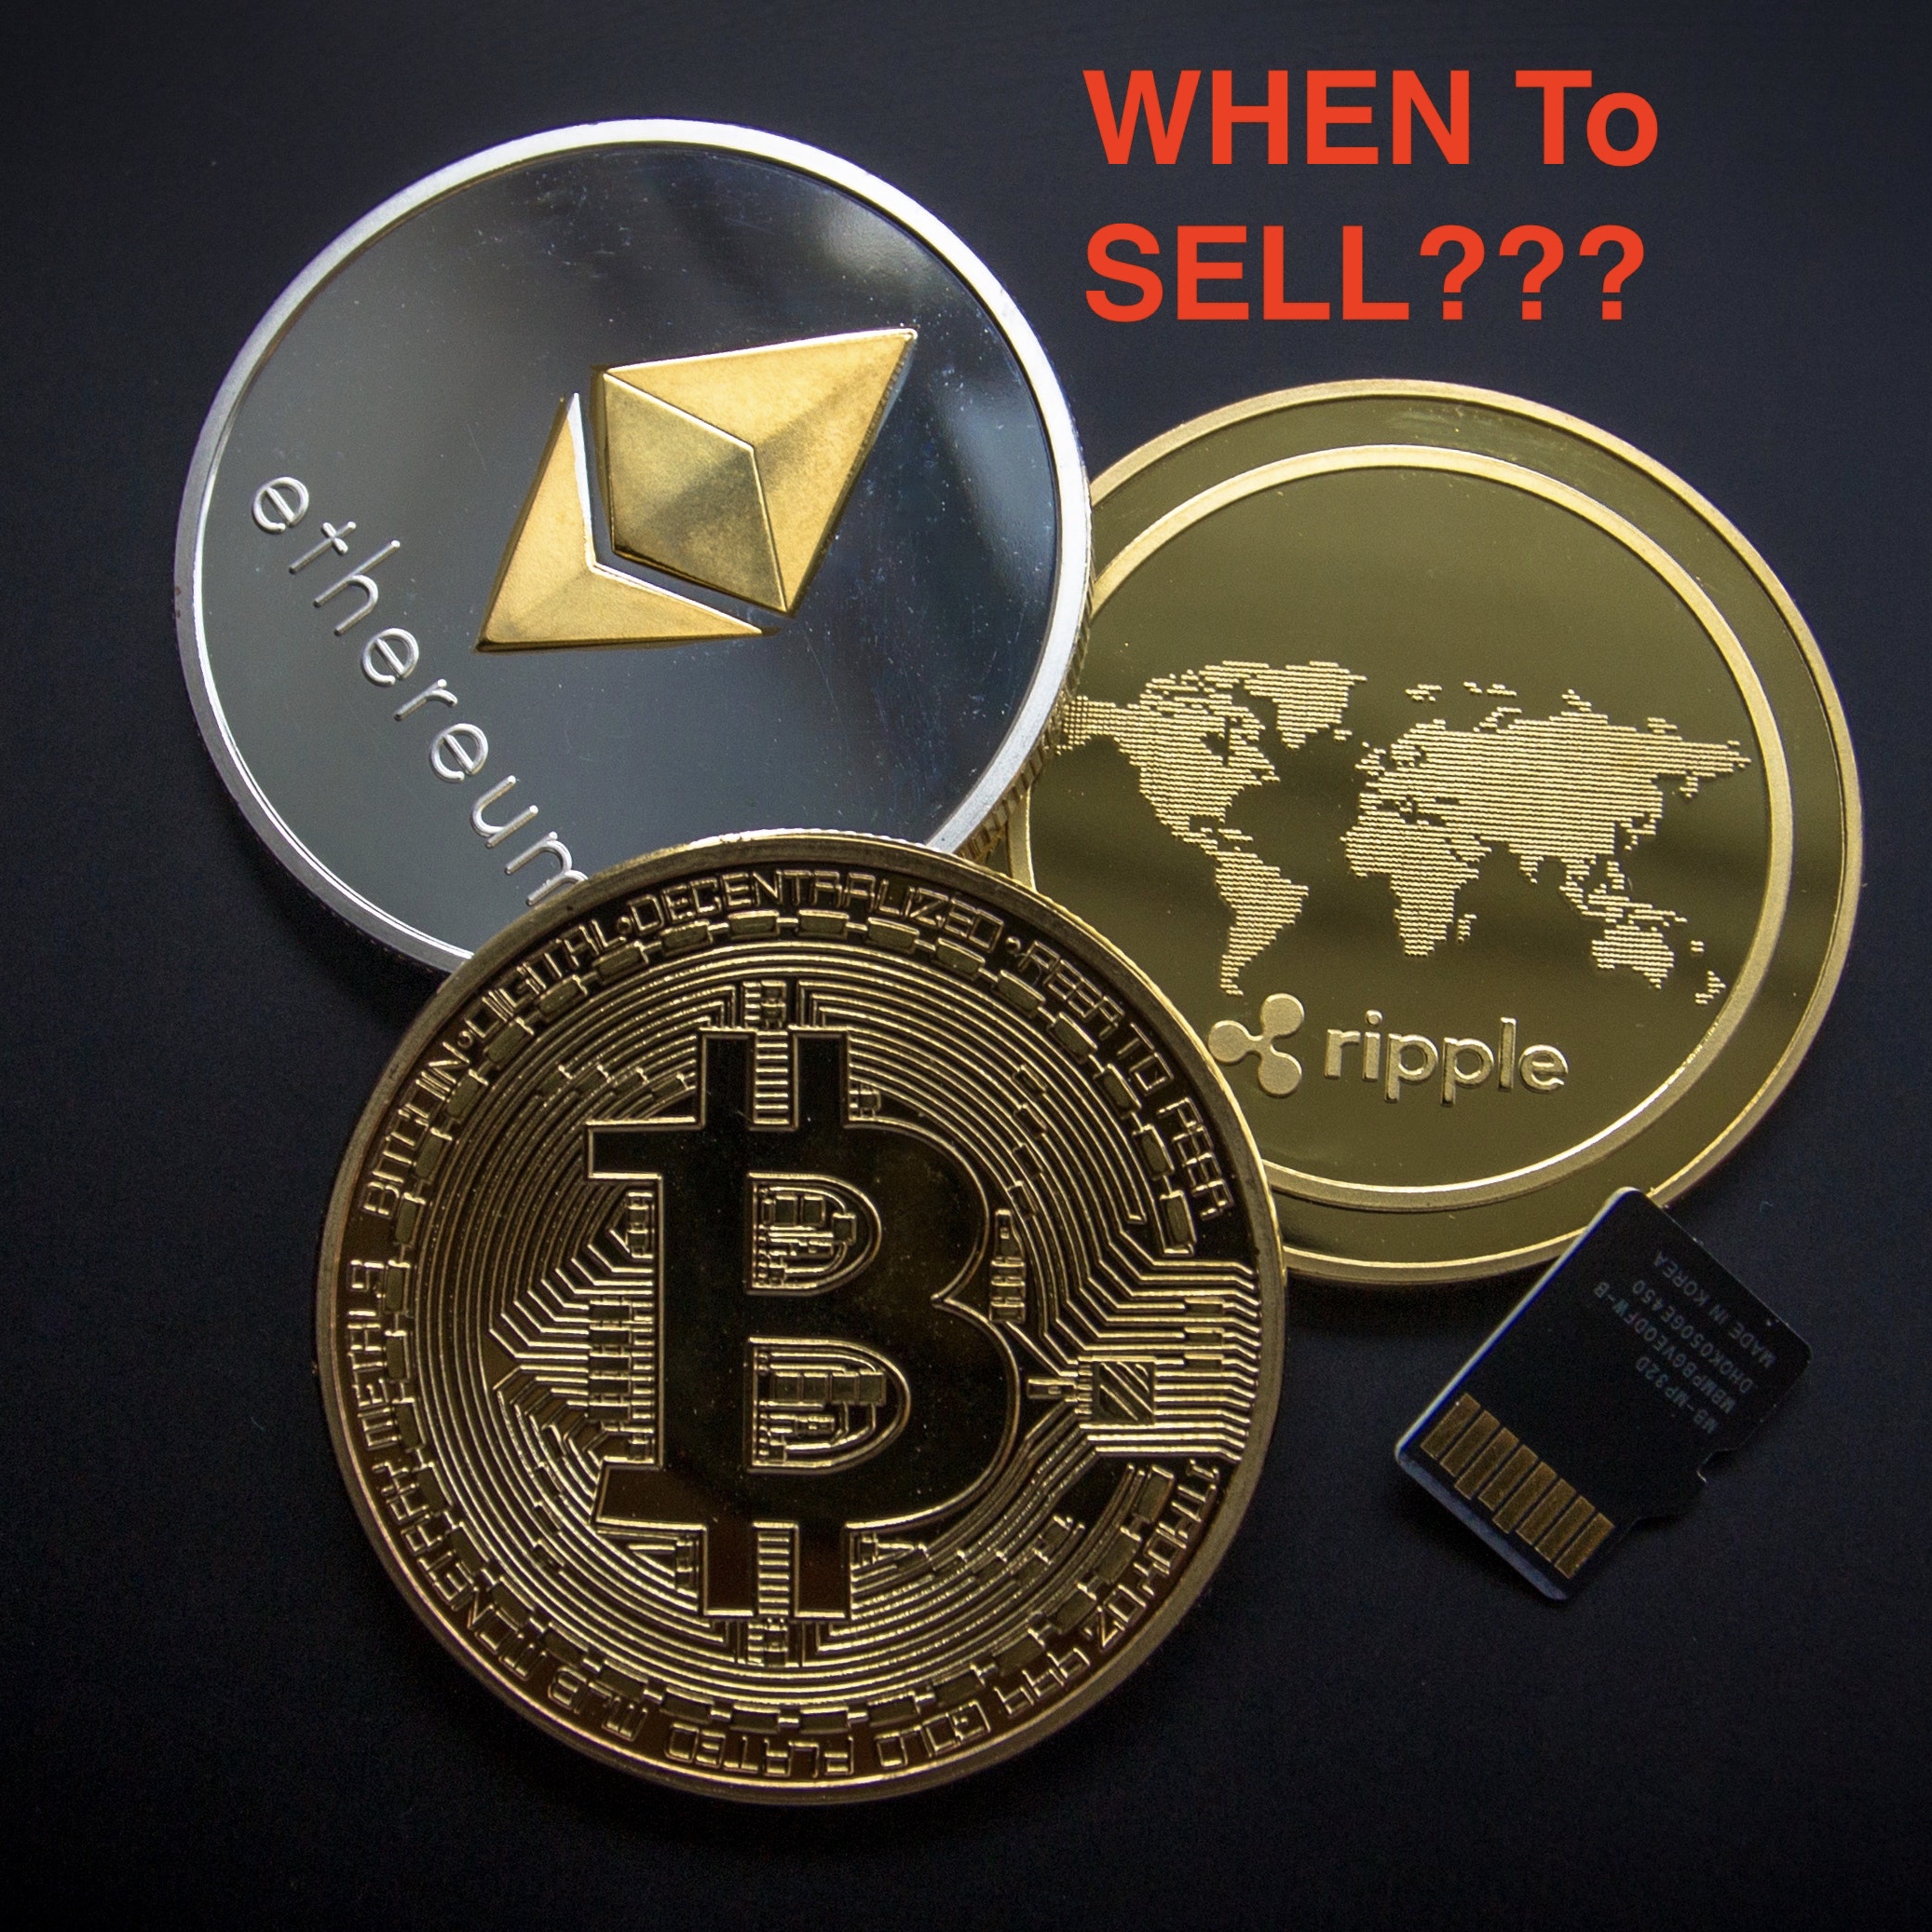 When To Sell Bitcoin